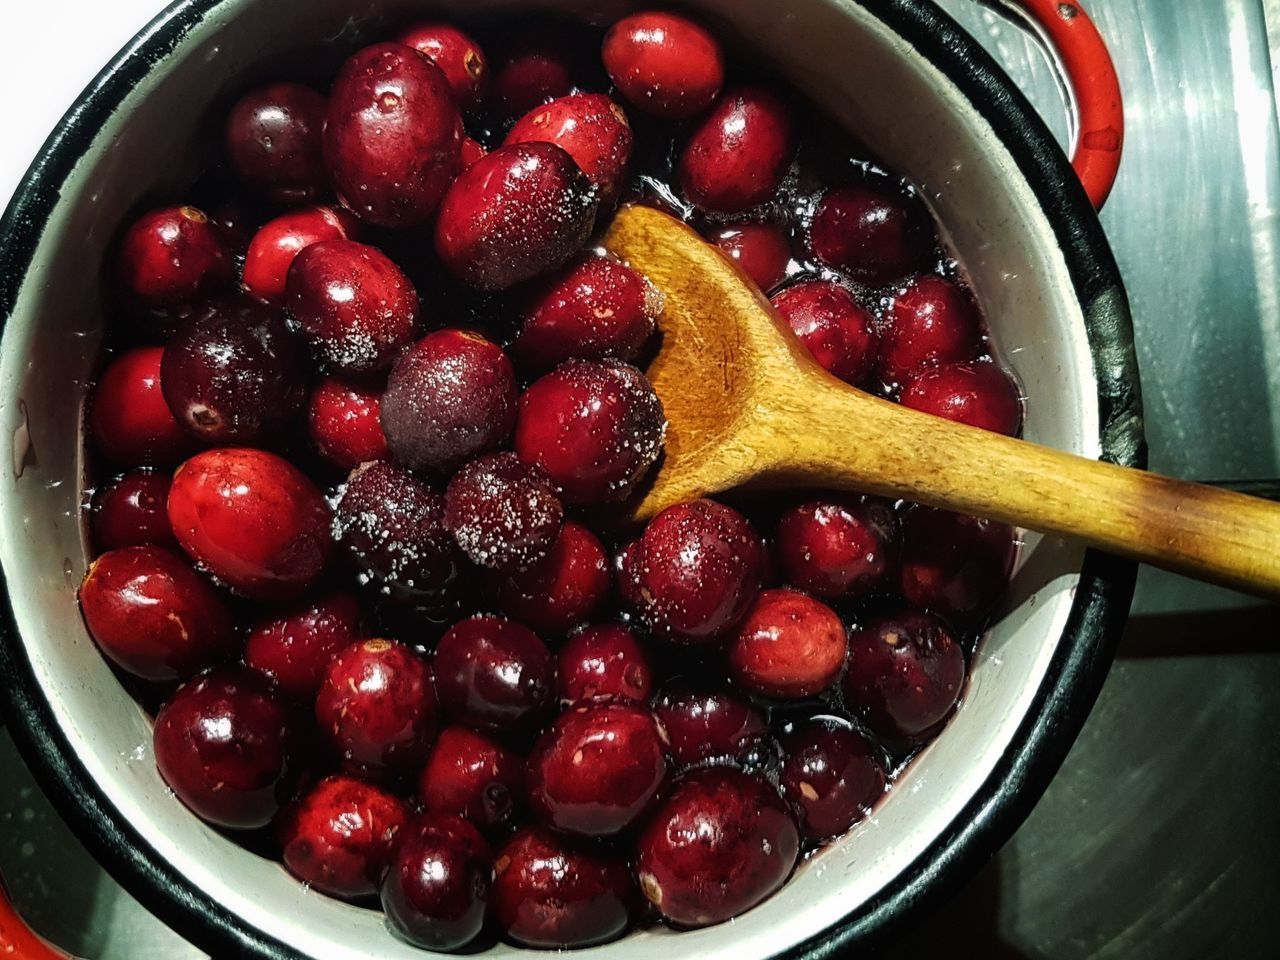 food and drink, food, plant, healthy eating, fruit, berry, freshness, berries, cranberry, red, wellbeing, household equipment, kitchen utensil, produce, bowl, indoors, cherry, no people, still life, raspberry, directly above, sweet food, close-up, cooking pan, high angle view, blackberry